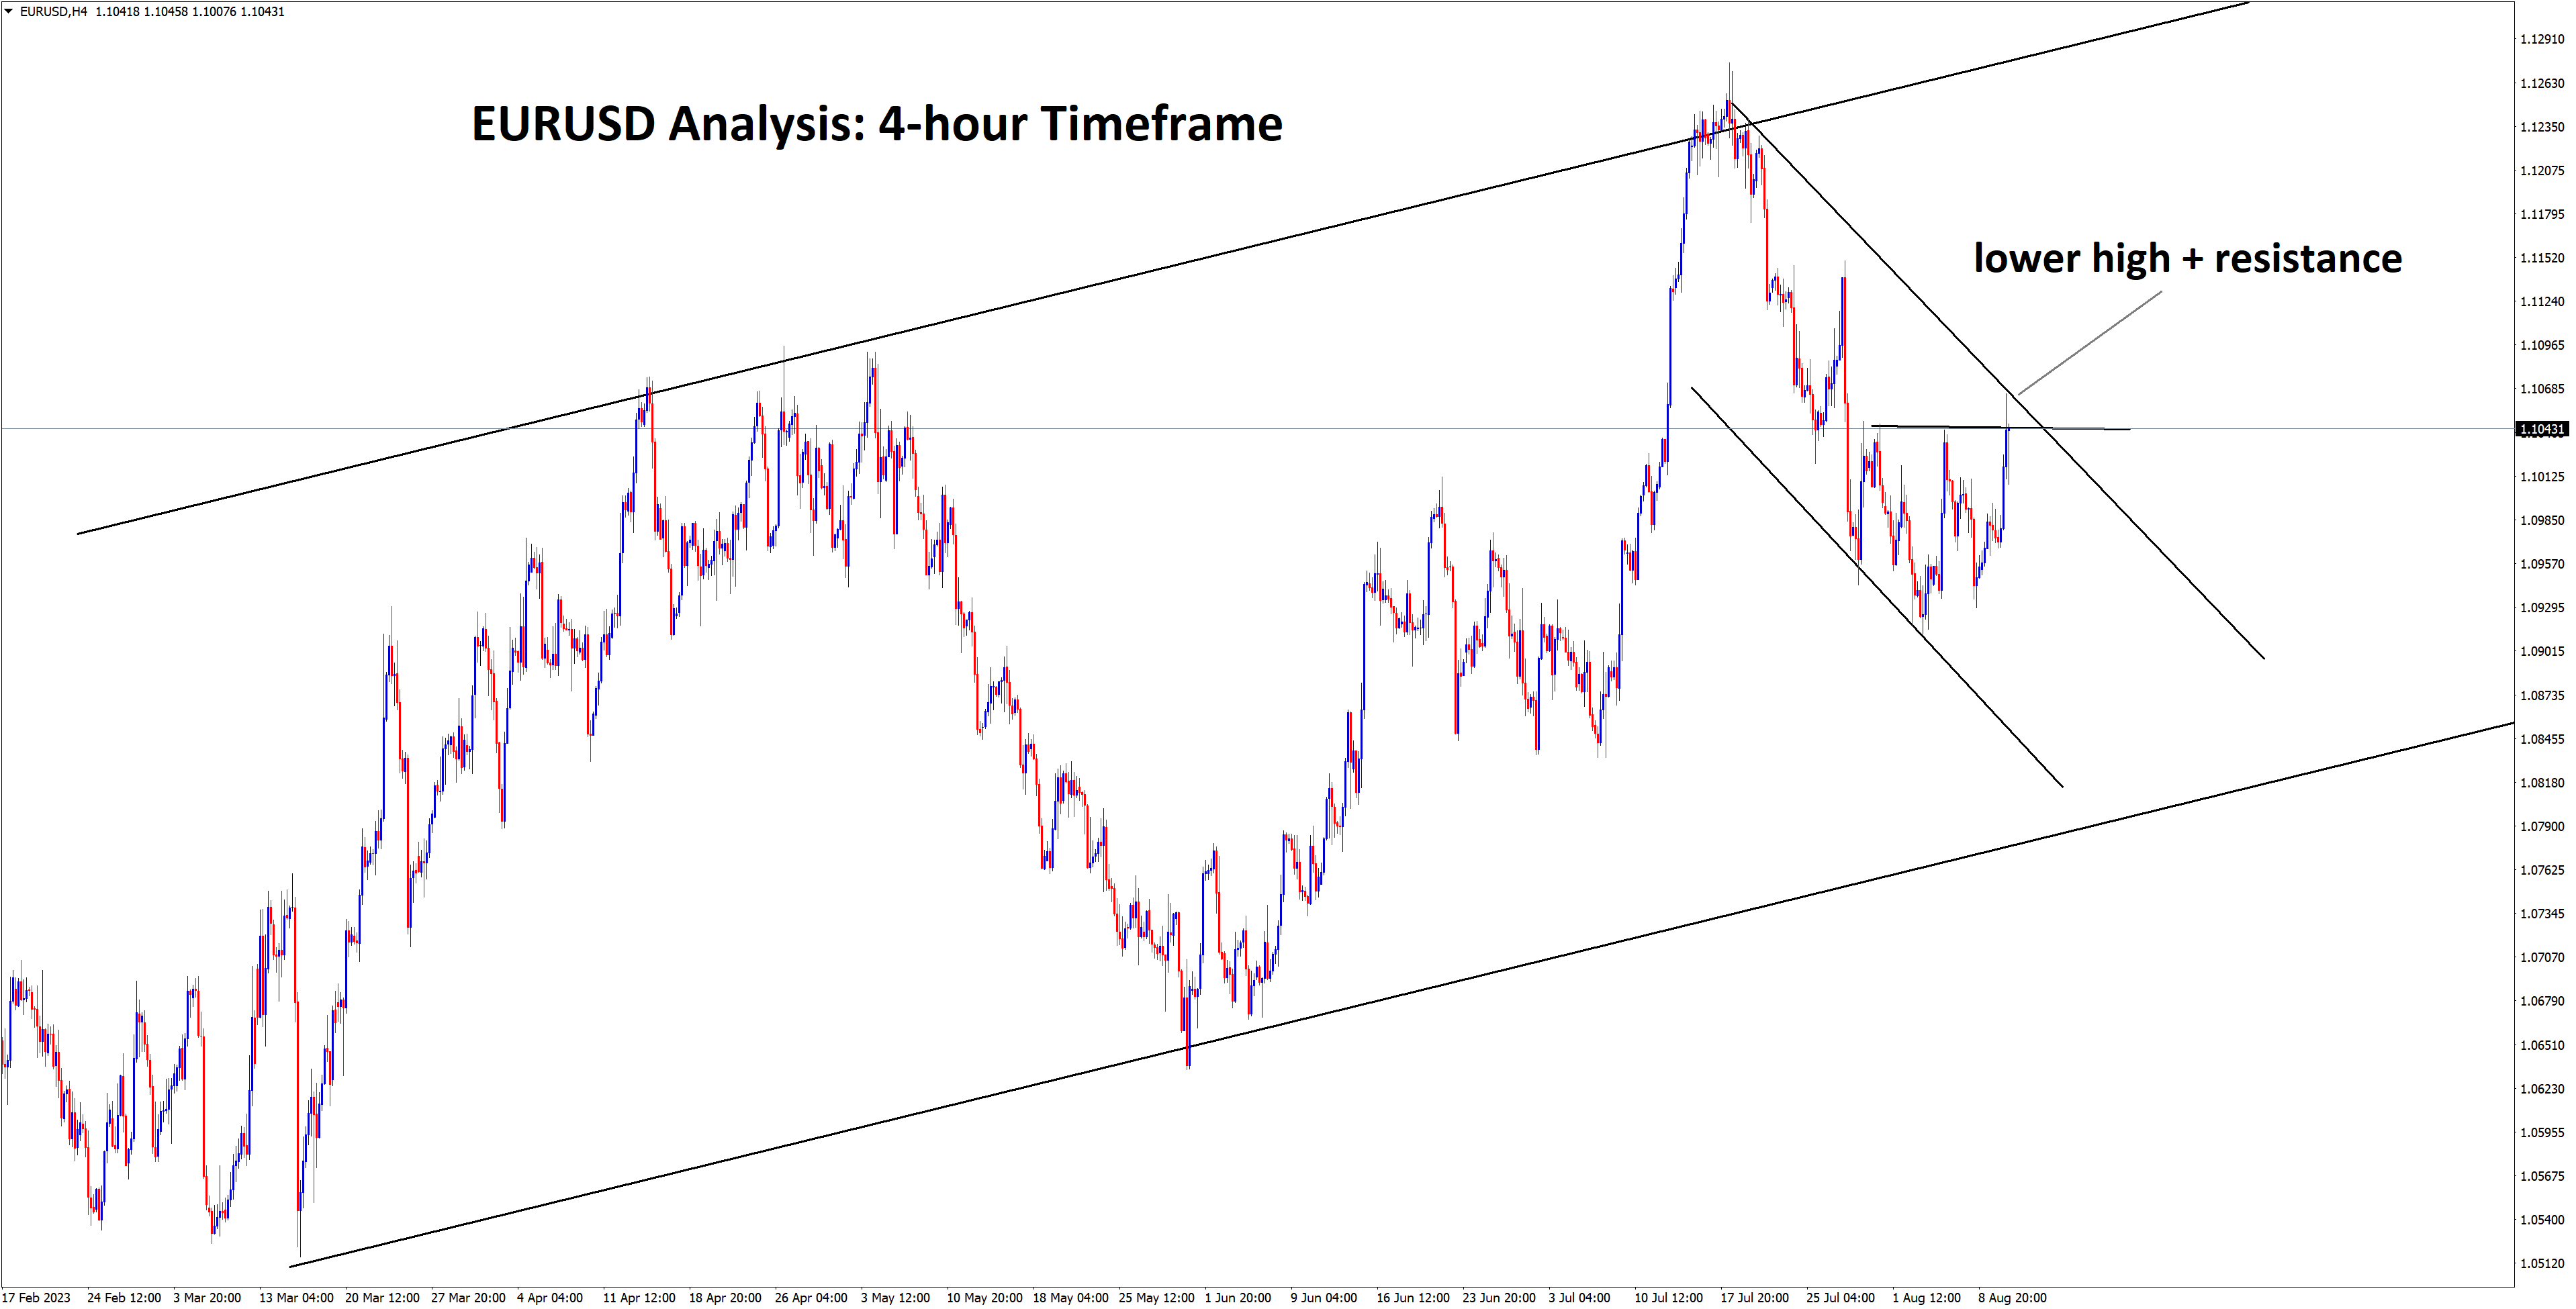 EURUSD at the lower high and horizontal resistance